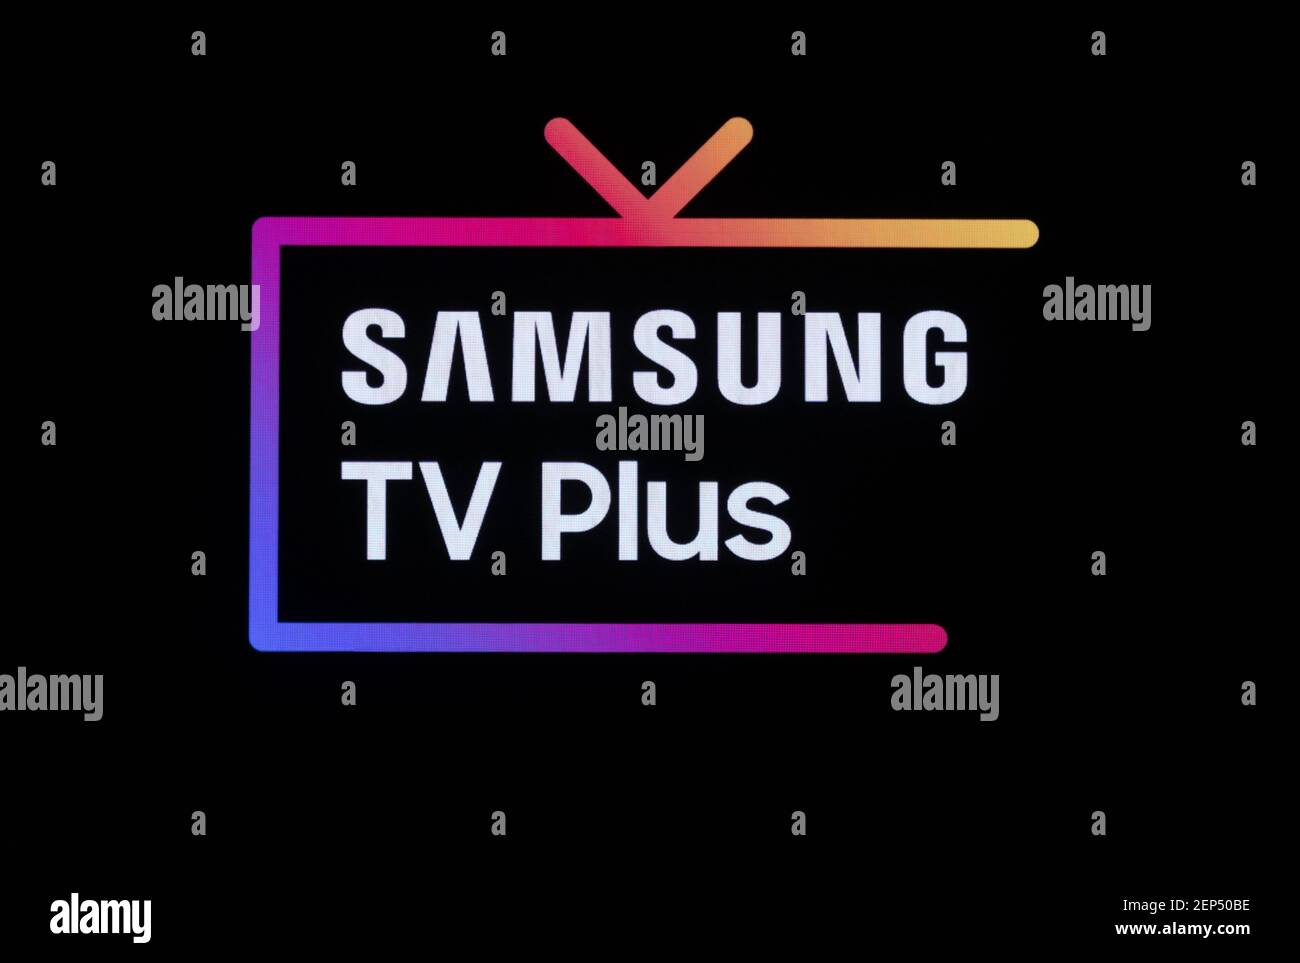 Samsung TV Plus logo is seen during Samsung Developer Conference in San Jose, California on October 29, 2019. (Photo by Yichuan Cao/Sipa USA) Stock Photo